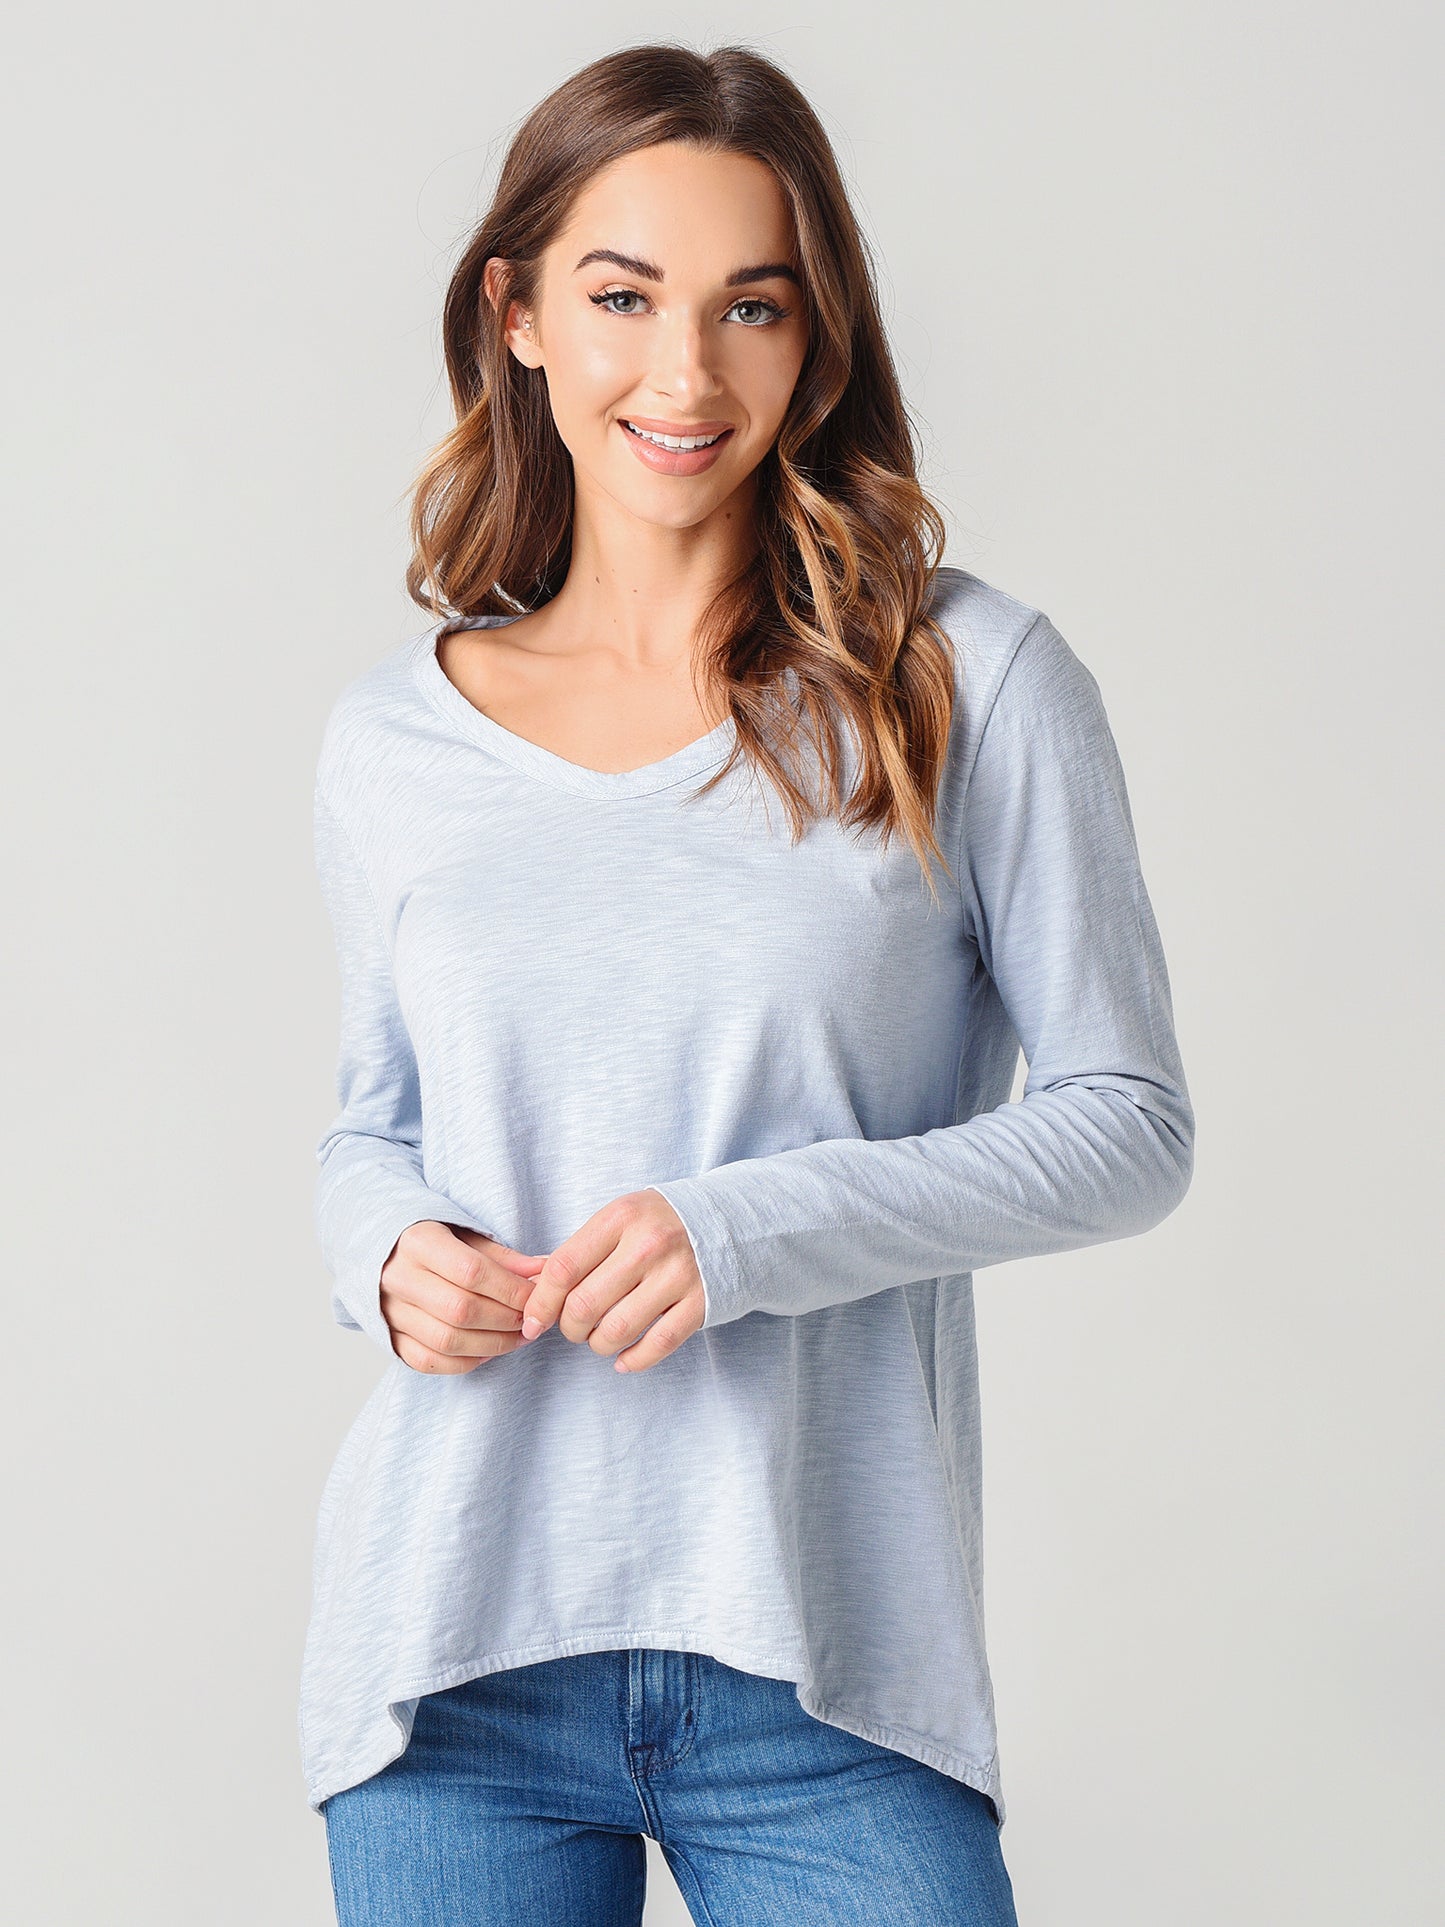 Dylan Women's V-Neck With Vented Back Tee